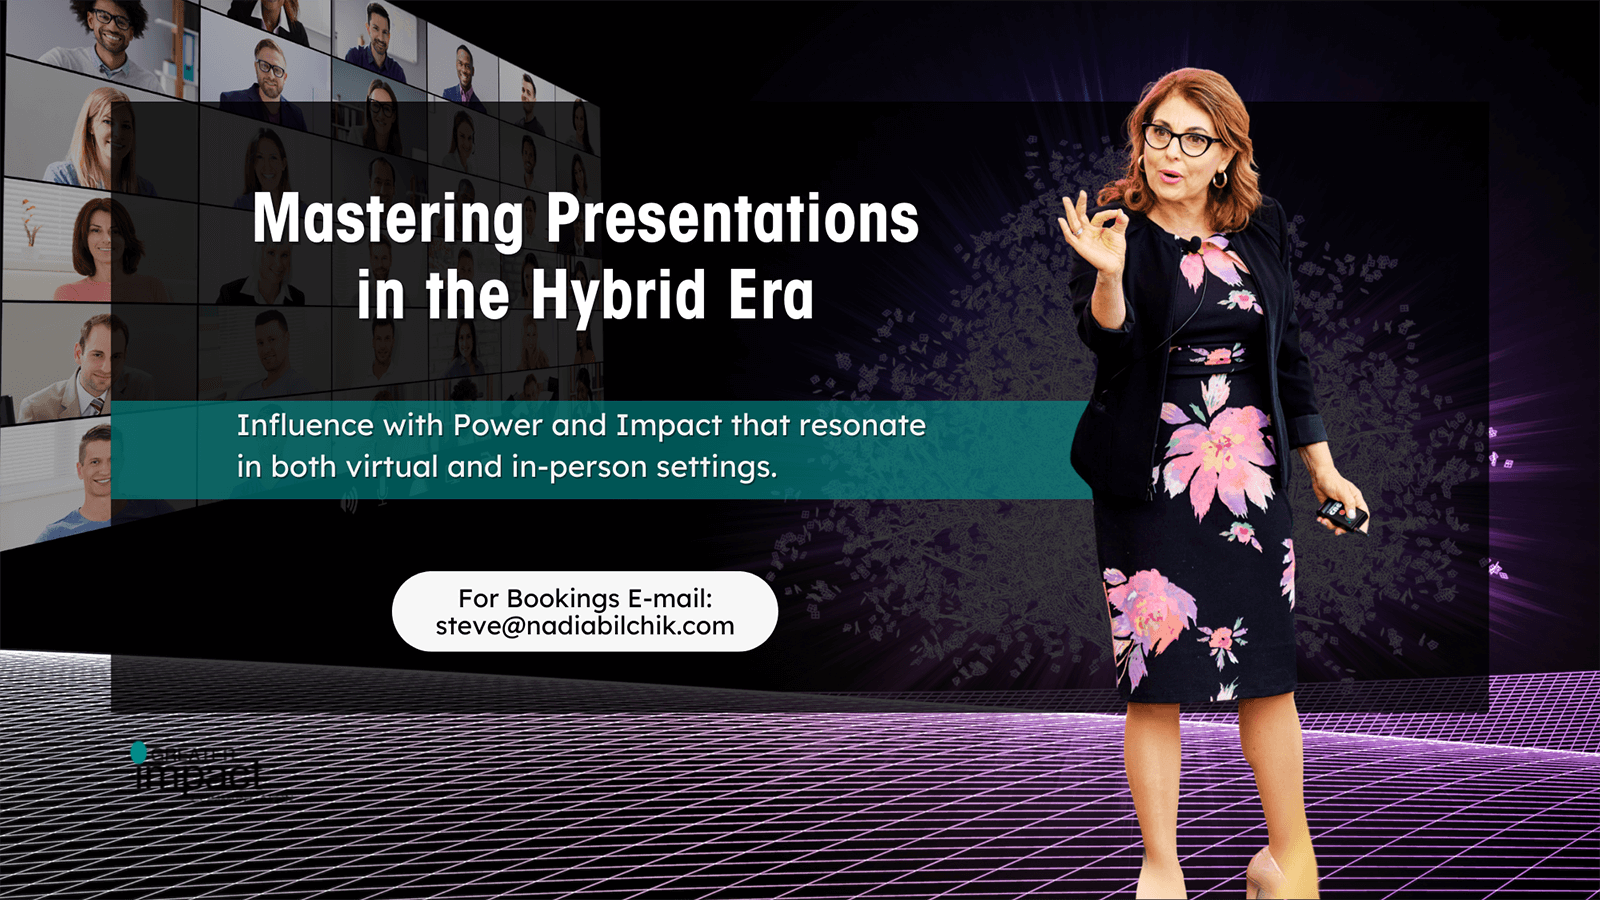 Mastering Presentations in the Hybrid Era: Influence with Power and Impact